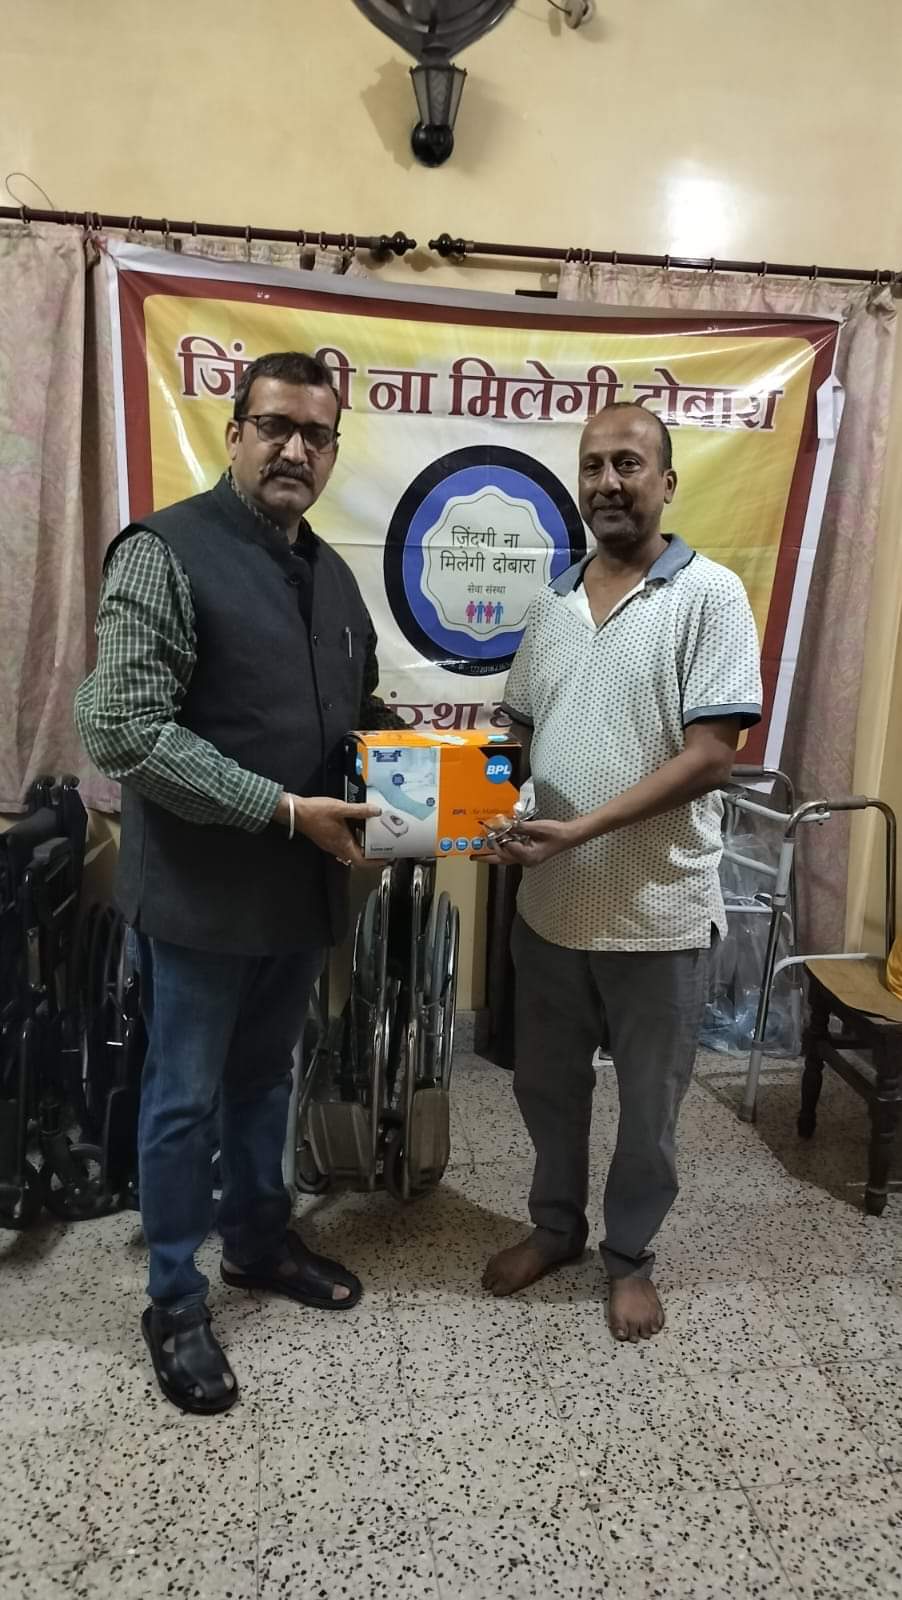 A large number of needy people are benefiting from Zindagi Na Milegi Dobara's Medical Equipment Bank, medical equipment is given free of cost for a month, Medical Equipment Bank, Ajay Sharma, Zindagi Na Milegi Dobara Seva Sansthan from Madhumani Seva Sadan located at Tatyapara in Raipur city.  , Air Bed, Normal Medical Bed, Side Railing, Glucose Stand, Oxygen Cylinder, Concentrator, Nebulizer, Walker, Commode Chair, Stick, Stretcher, Wheelchair, Khabargali